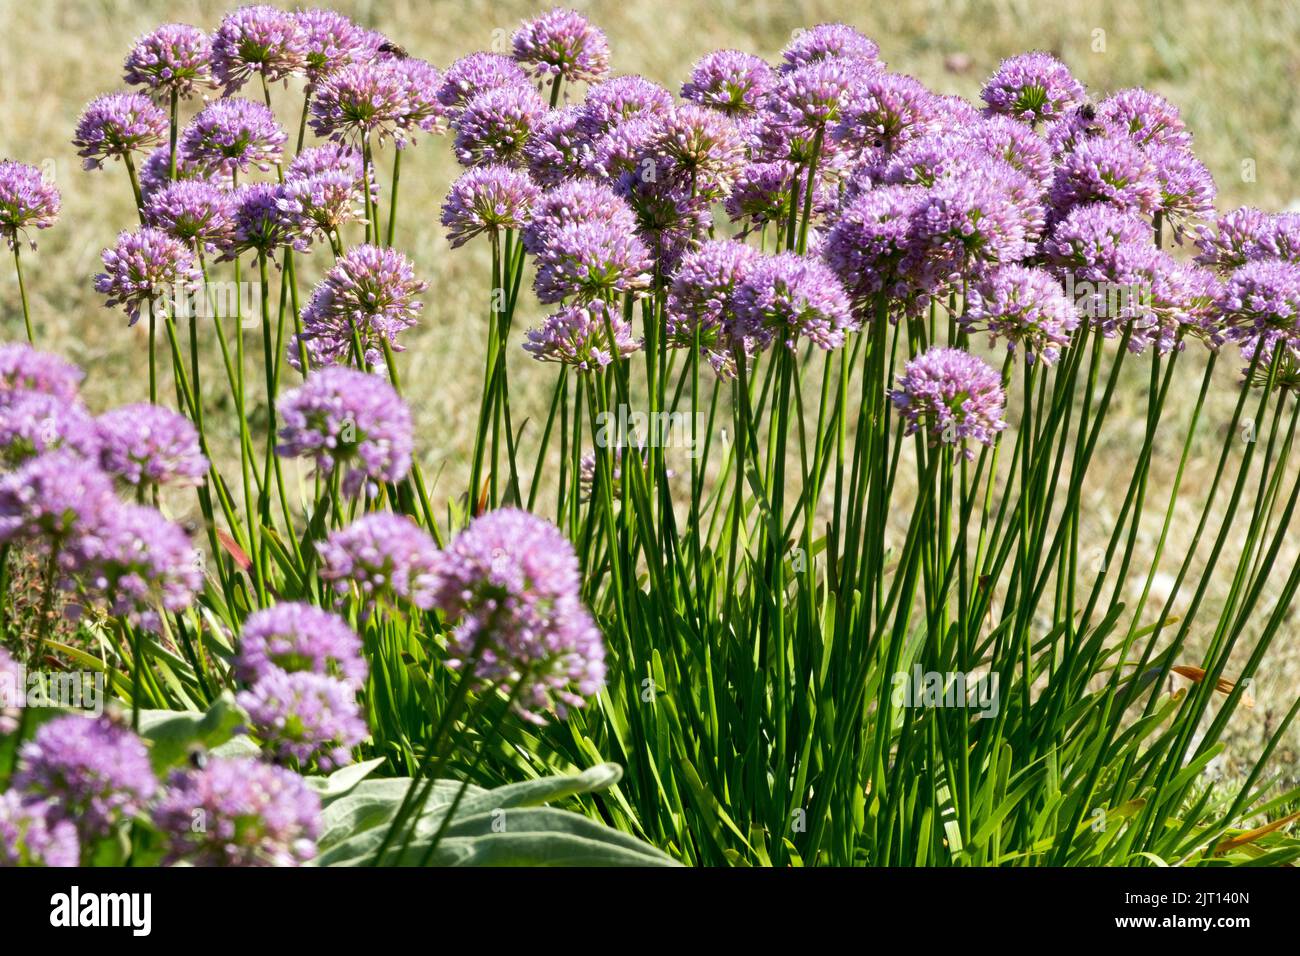 Growing clumps of Allium senescens, Flowers, Garden, Alliums, Curly Chives, Mountain Garlic, Ornamental Onion Stock Photo